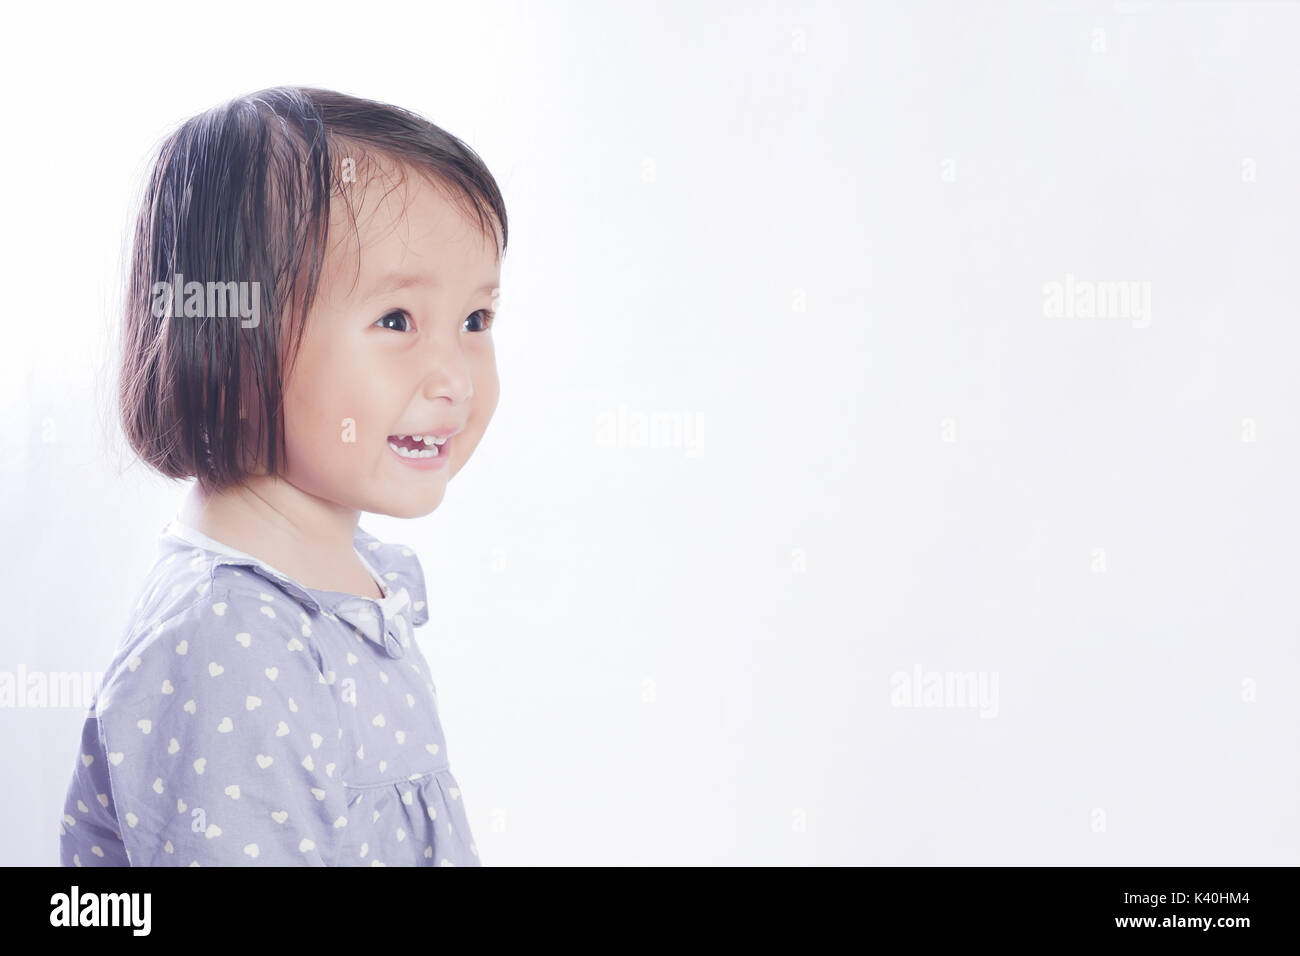 Portrait Of 2 Year Old Little Girl Smiling Face On Bright White